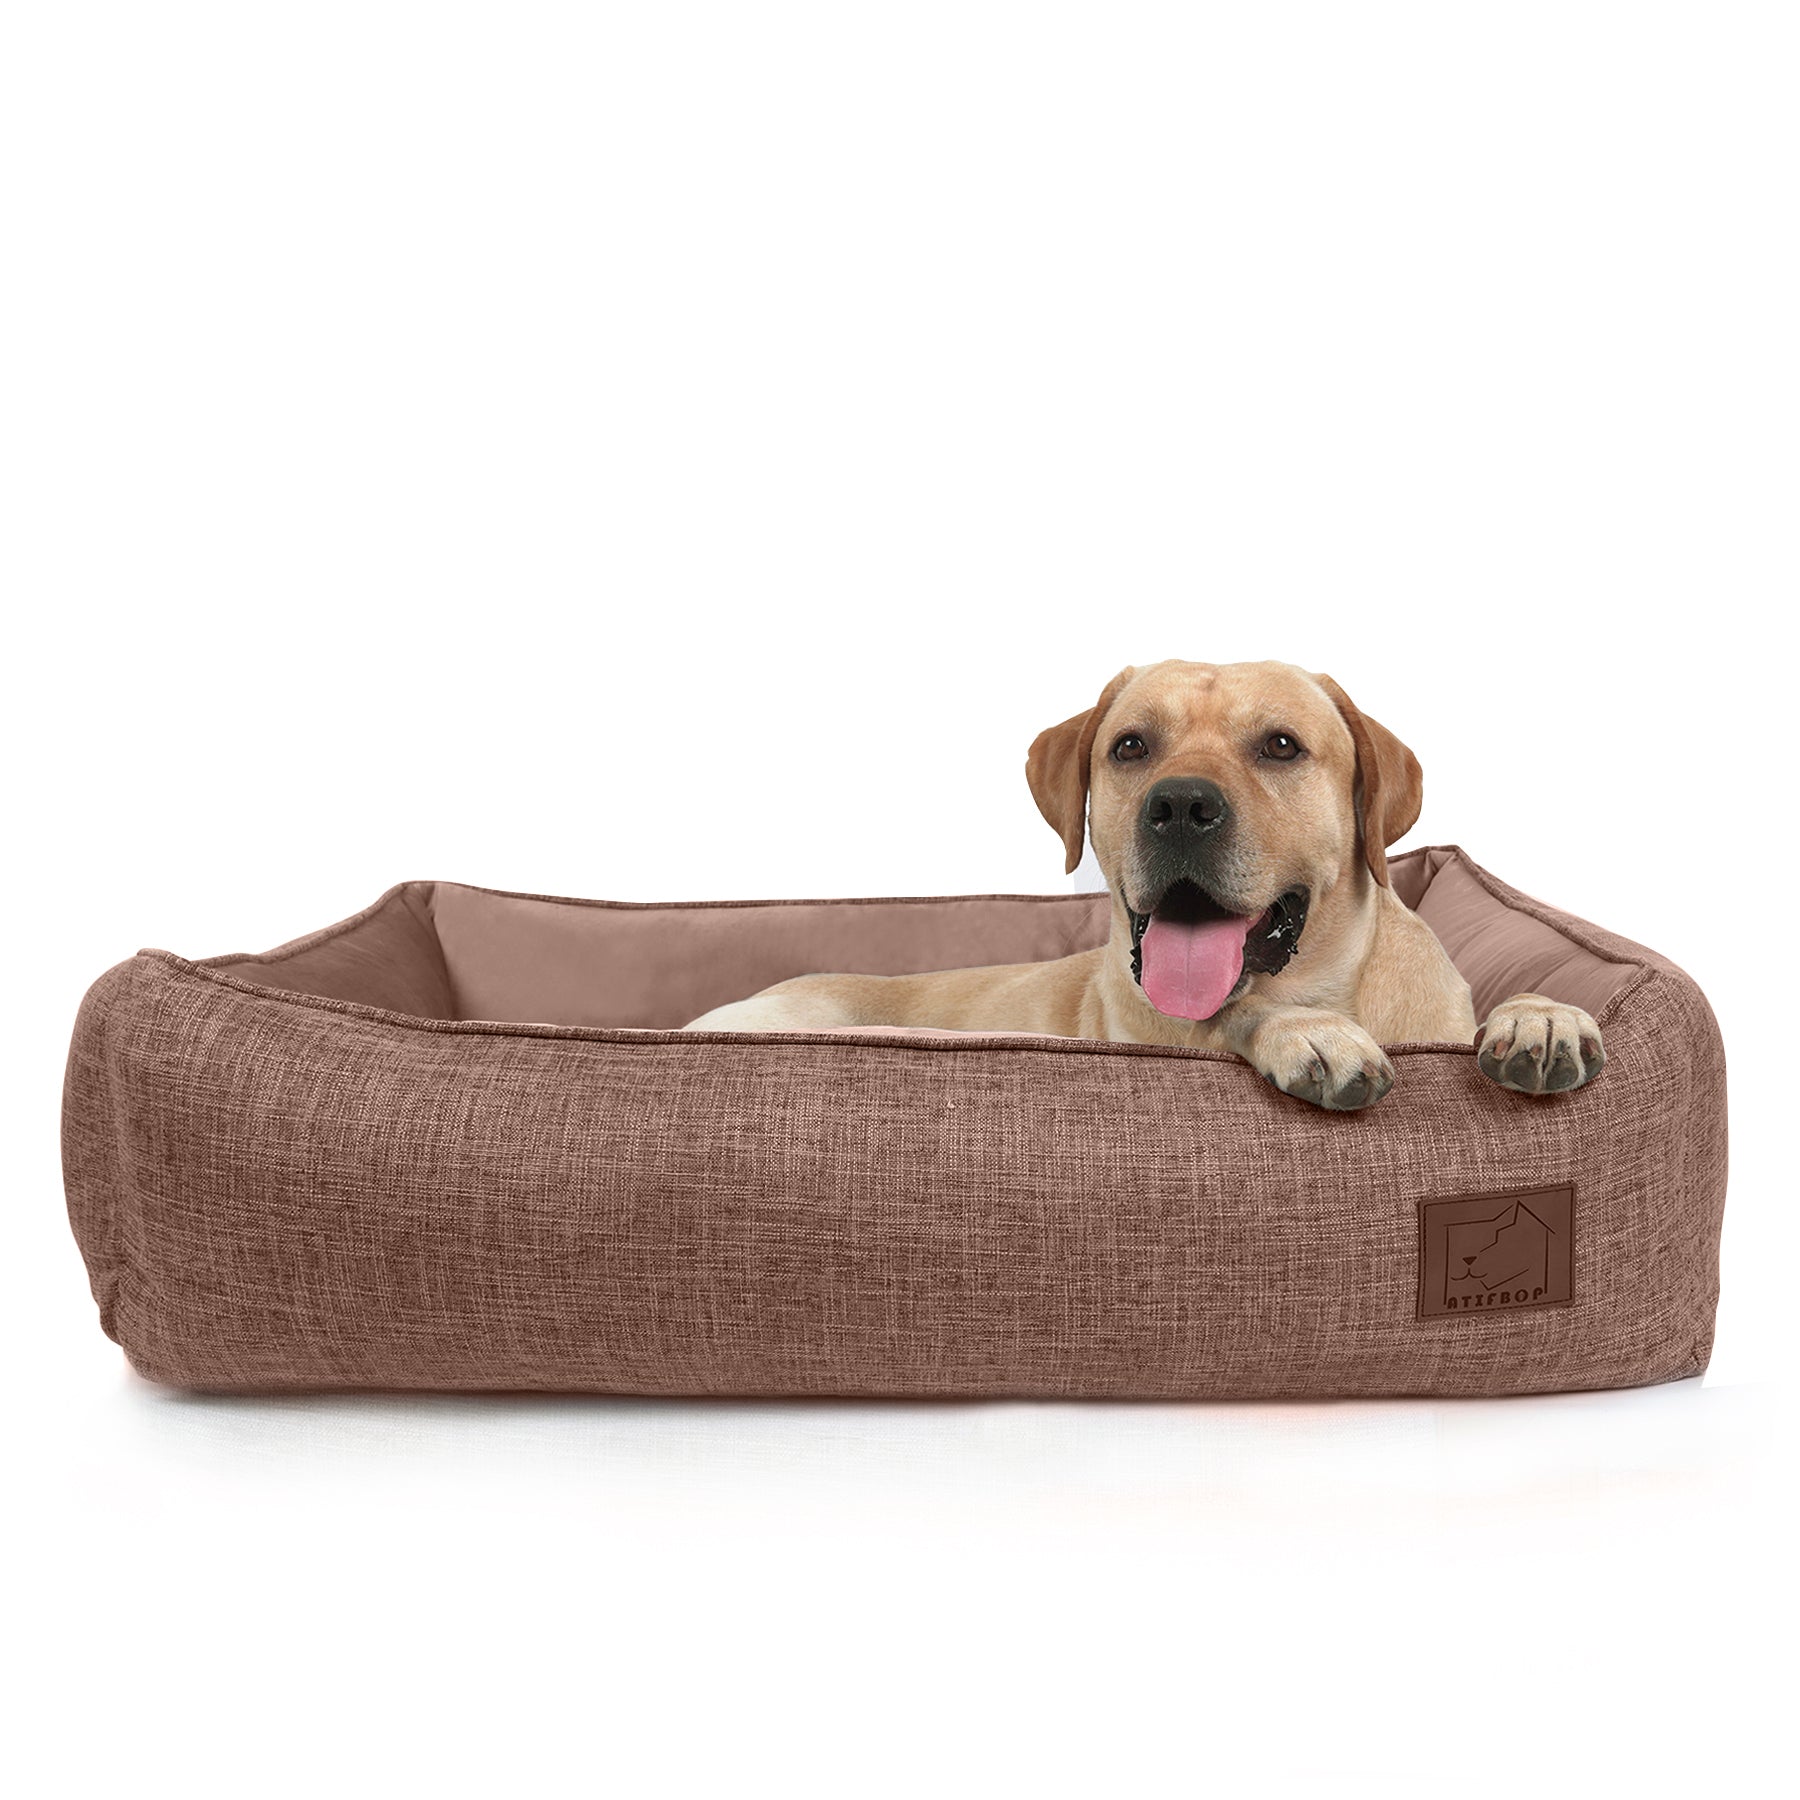 ATIFBOP Orthopedic Pet Bed for Large Dogs, Pain Relief Soft Couch Pet Bed（Brown）